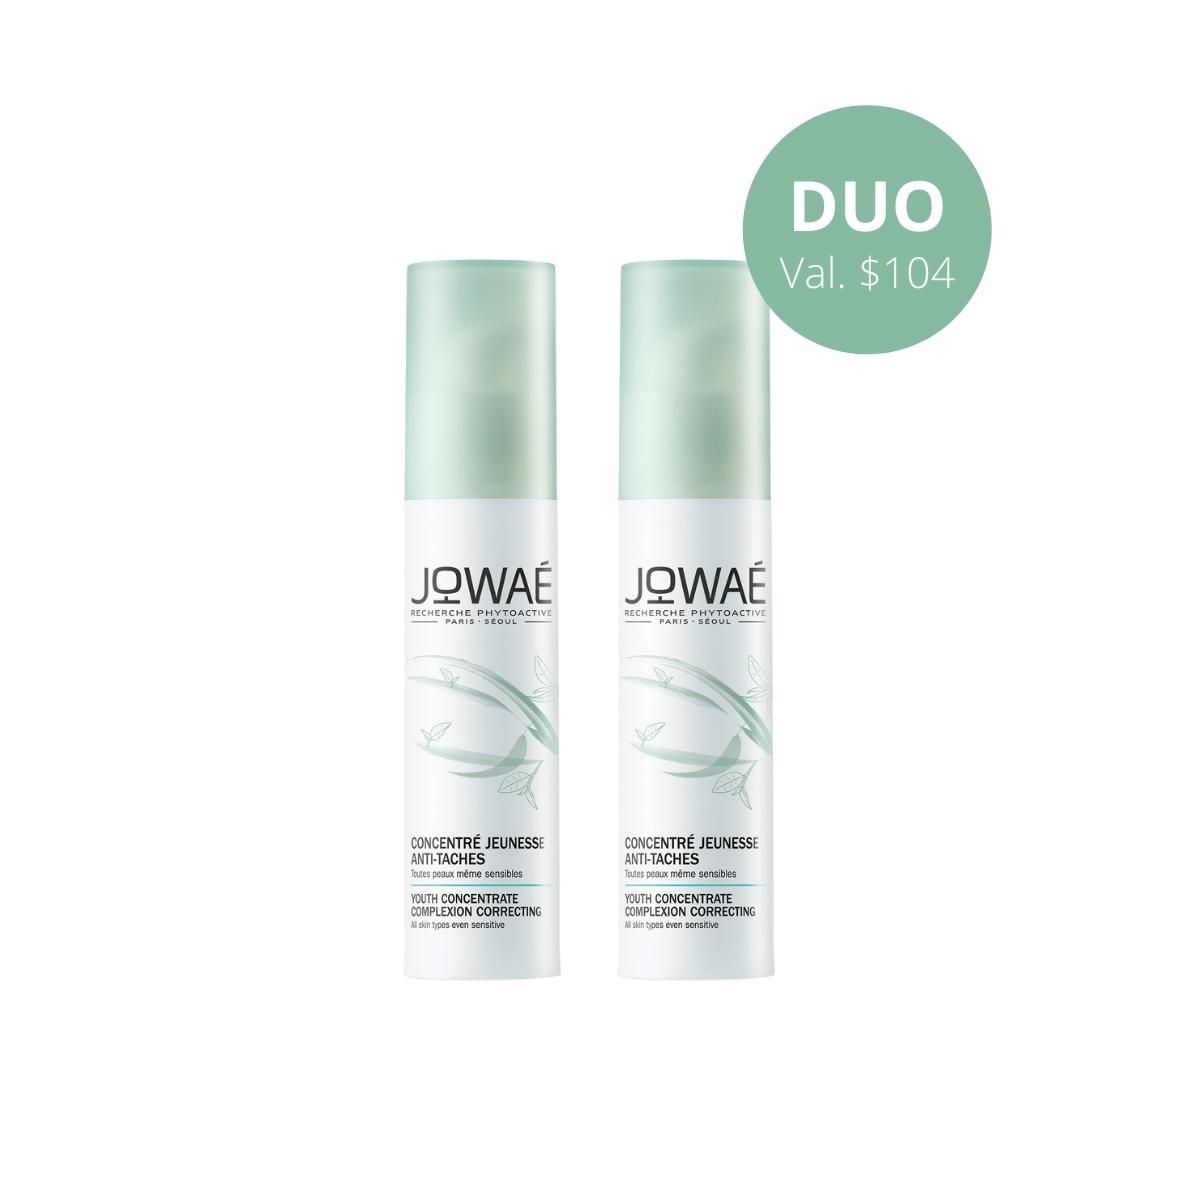 DUO - Youth Concentrate Complexion Correcting